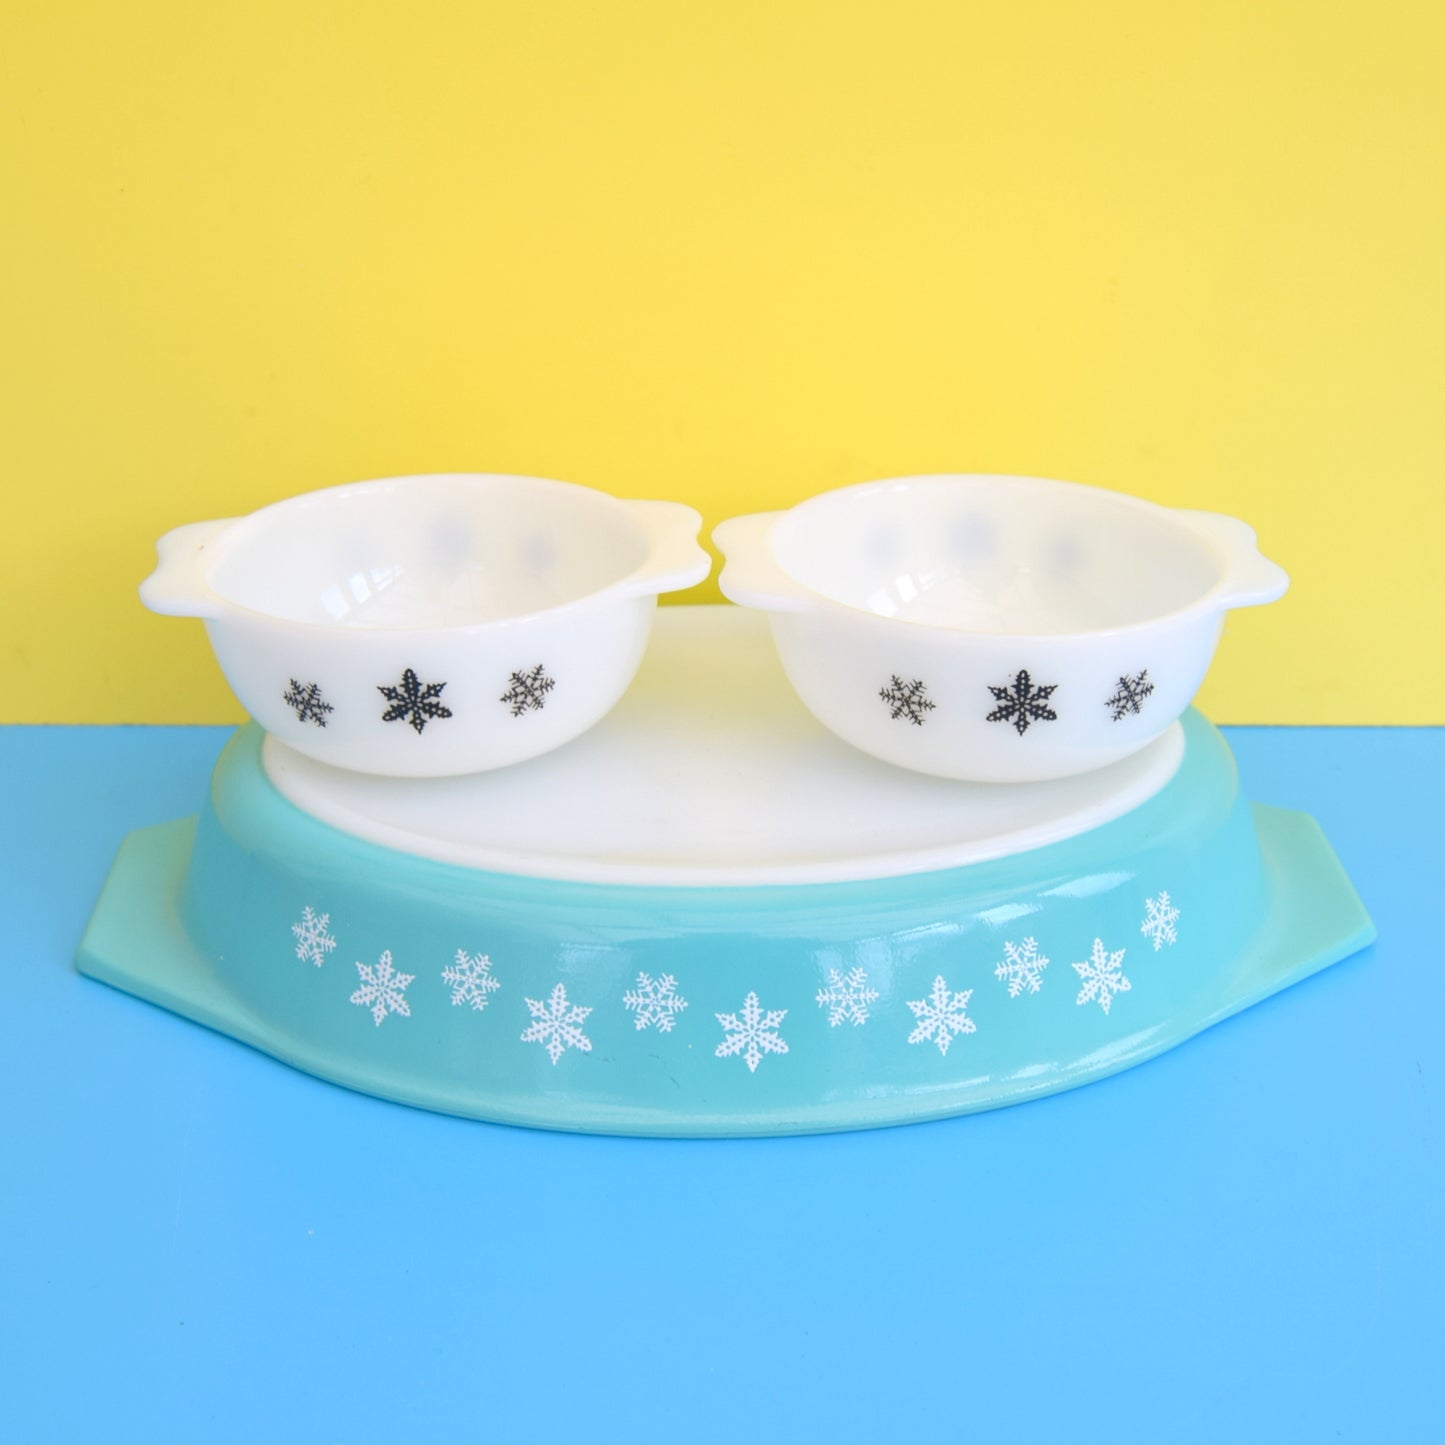 Vintage 1950s Pyrex Pieces- Snowflake Oval Casserole / Small Bowls